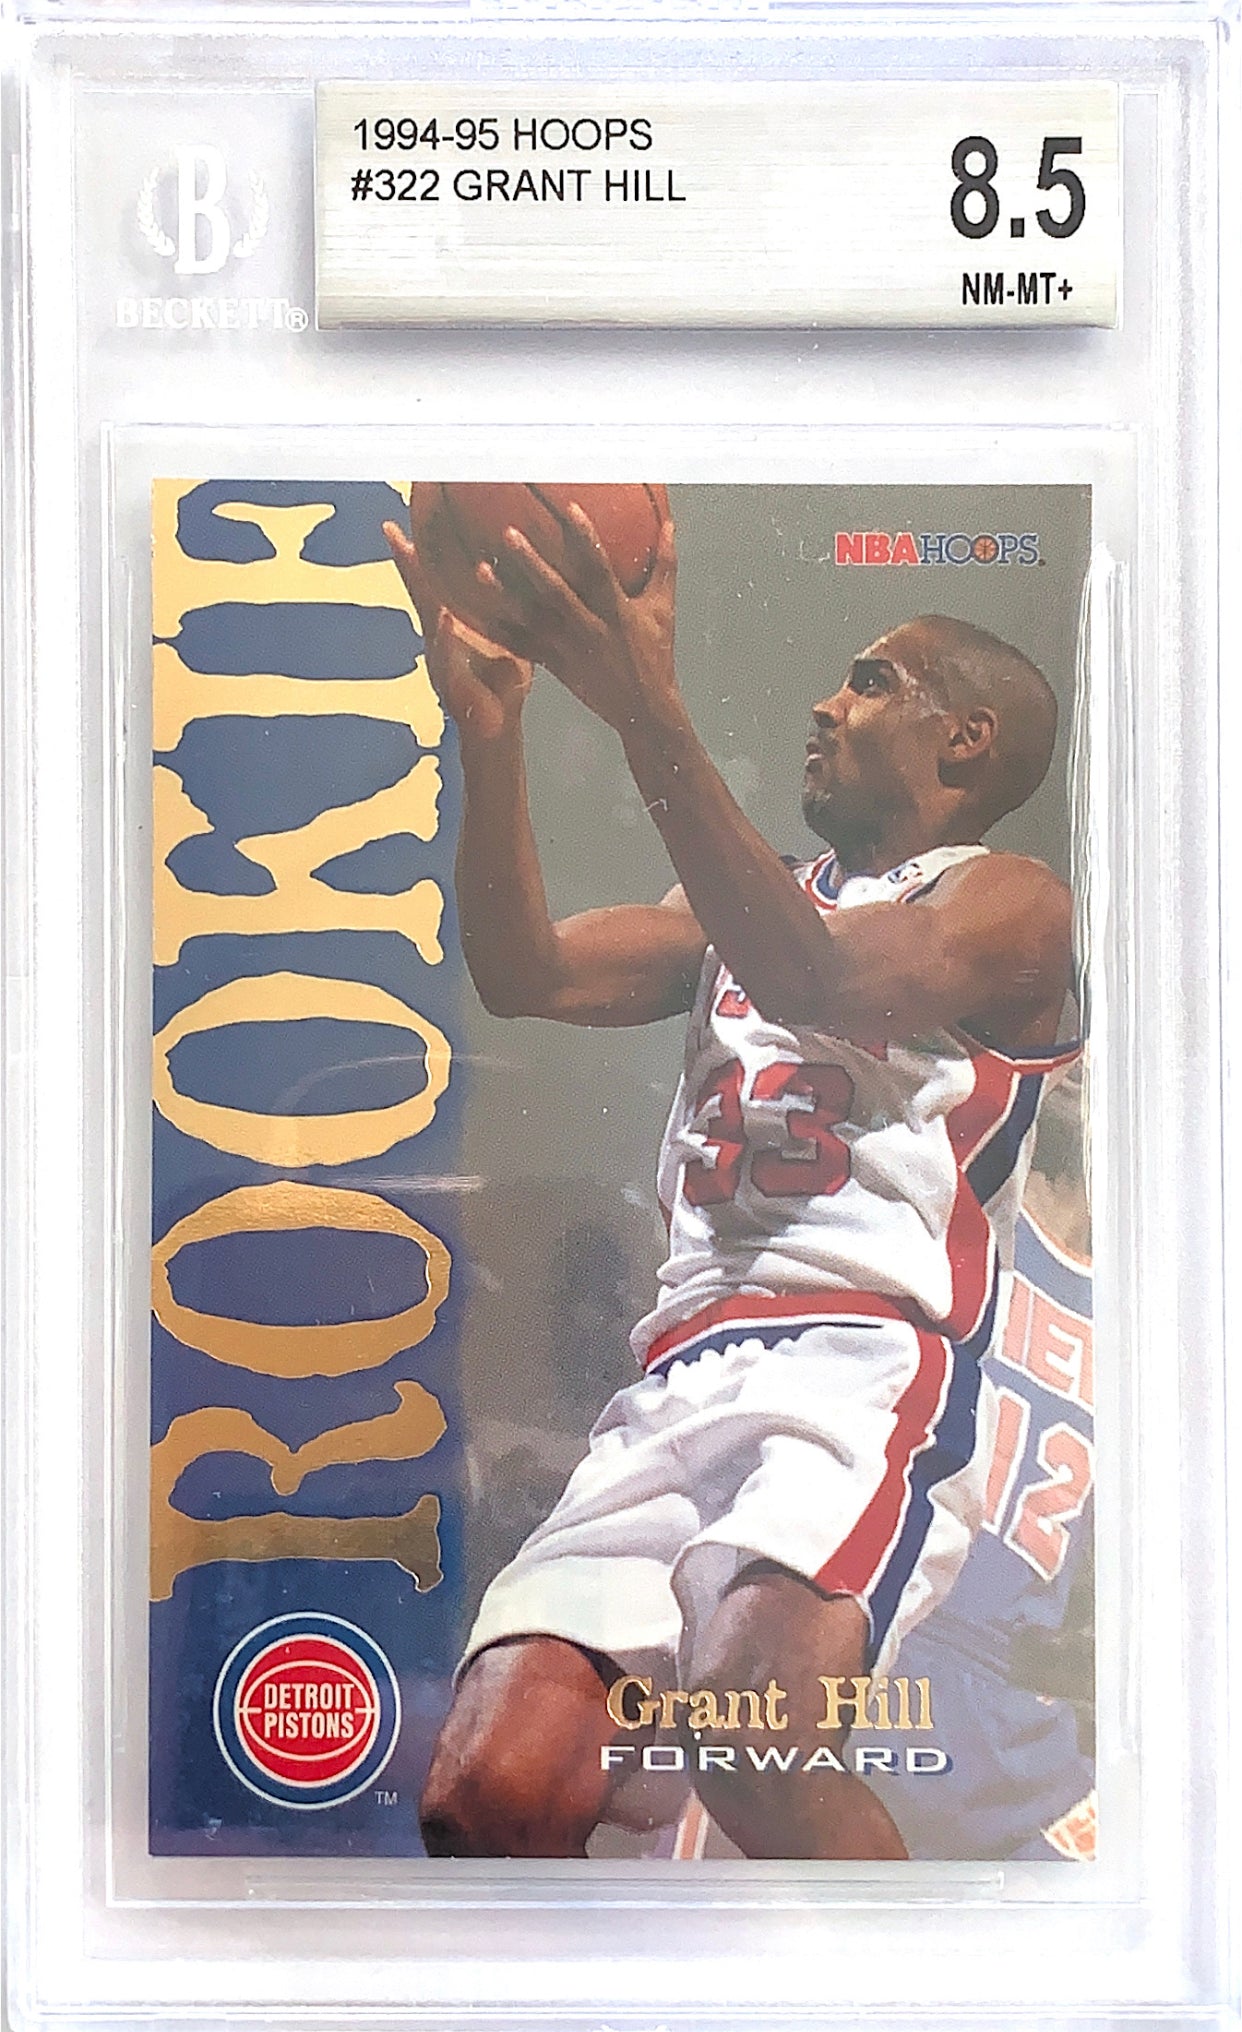 1994-95 Hoops Grant Hill Rookie Card BGS 8.5